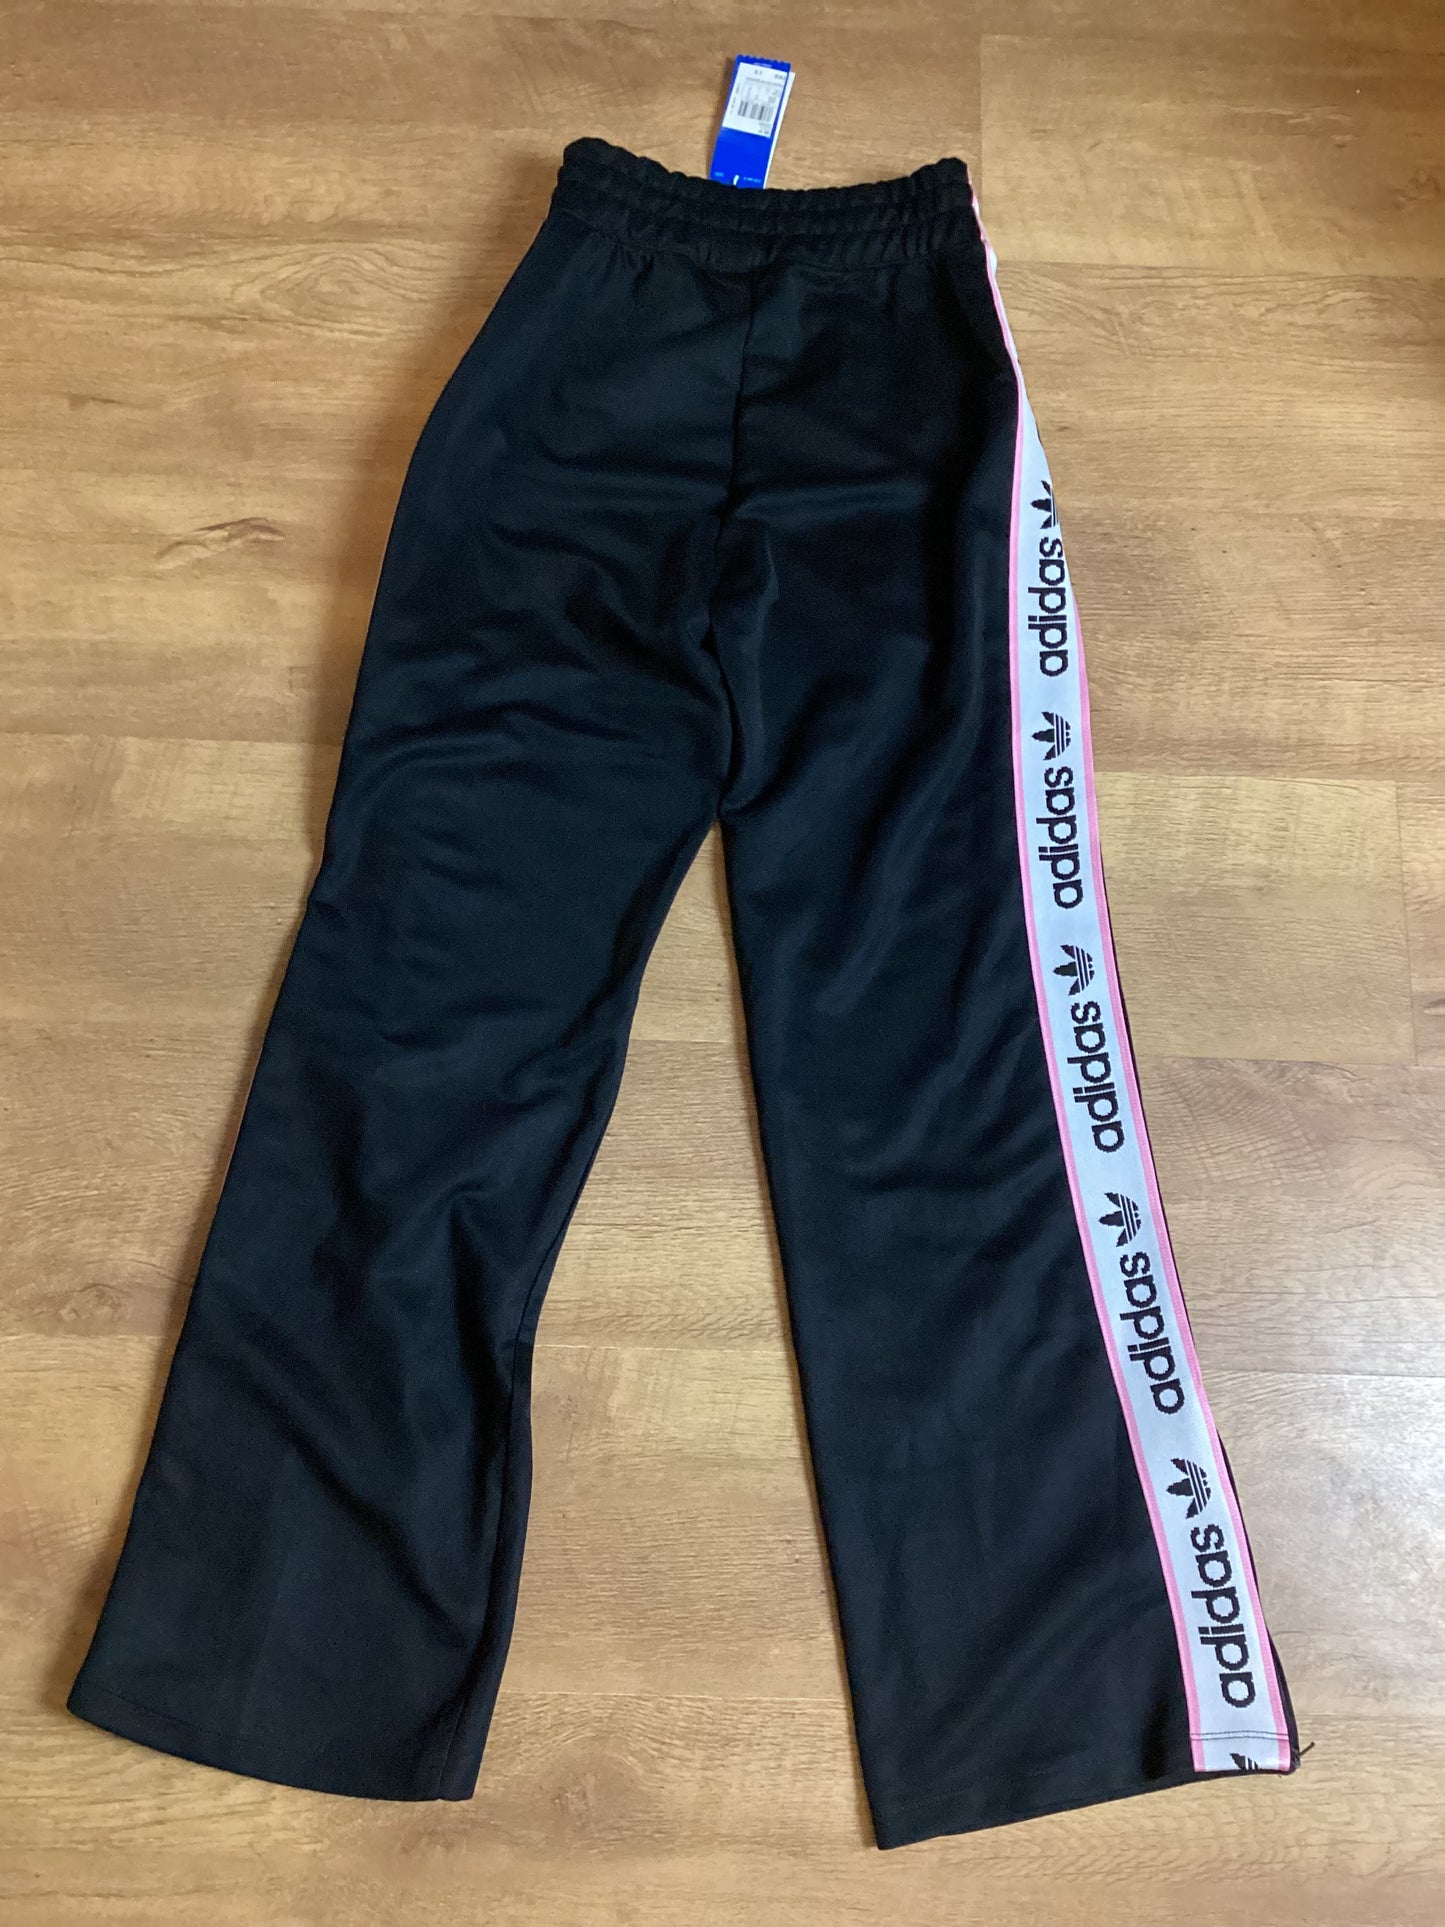 BNWT Adidas Black Trousers with Pink Stripe Size 8